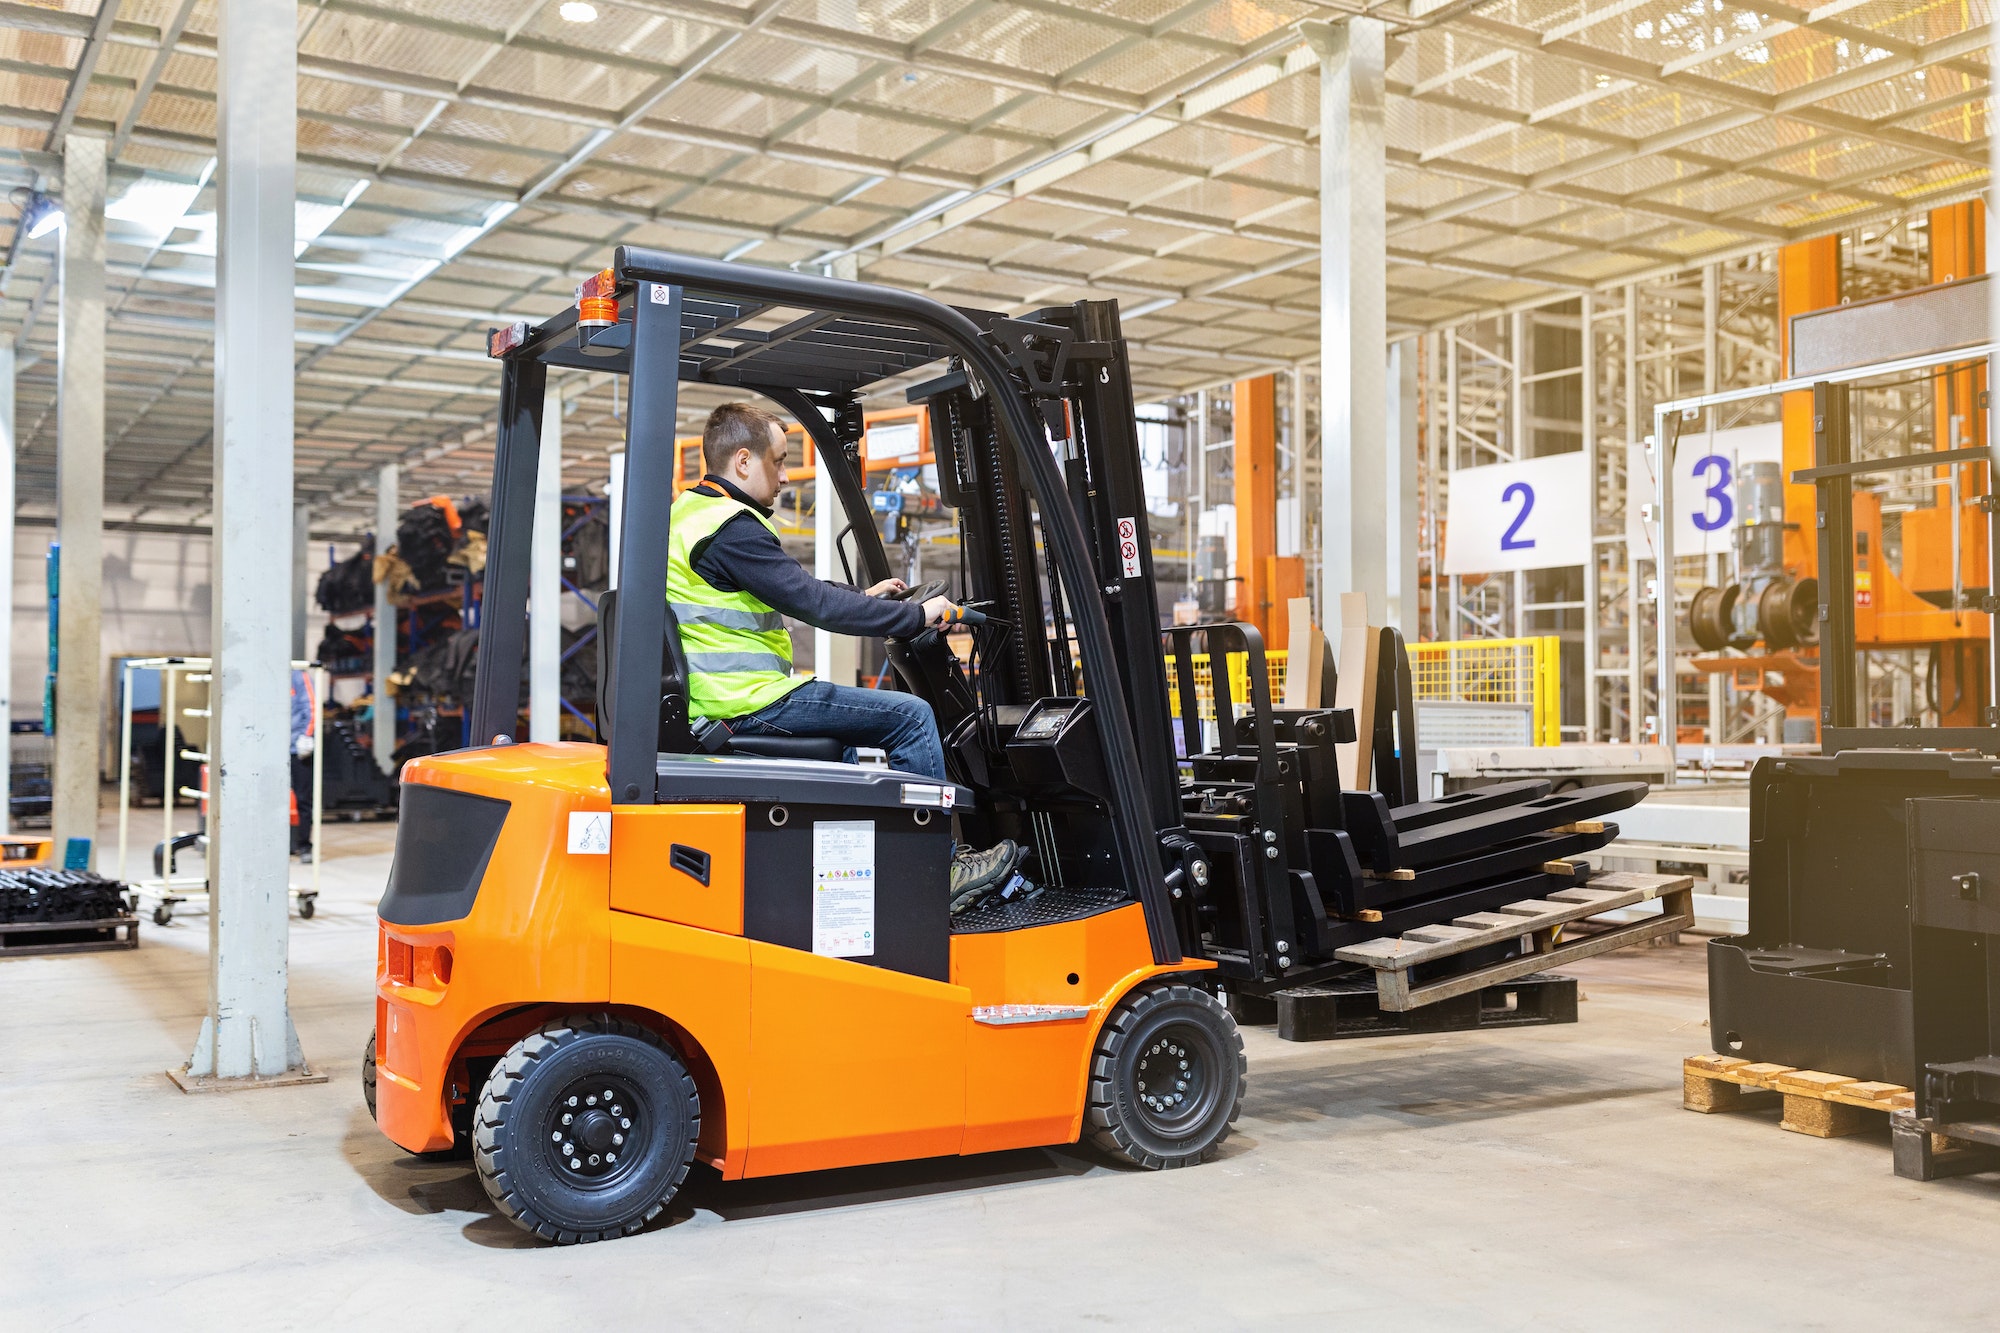 Storehouse employee in uniform working on forklift in modern automatic warehouse